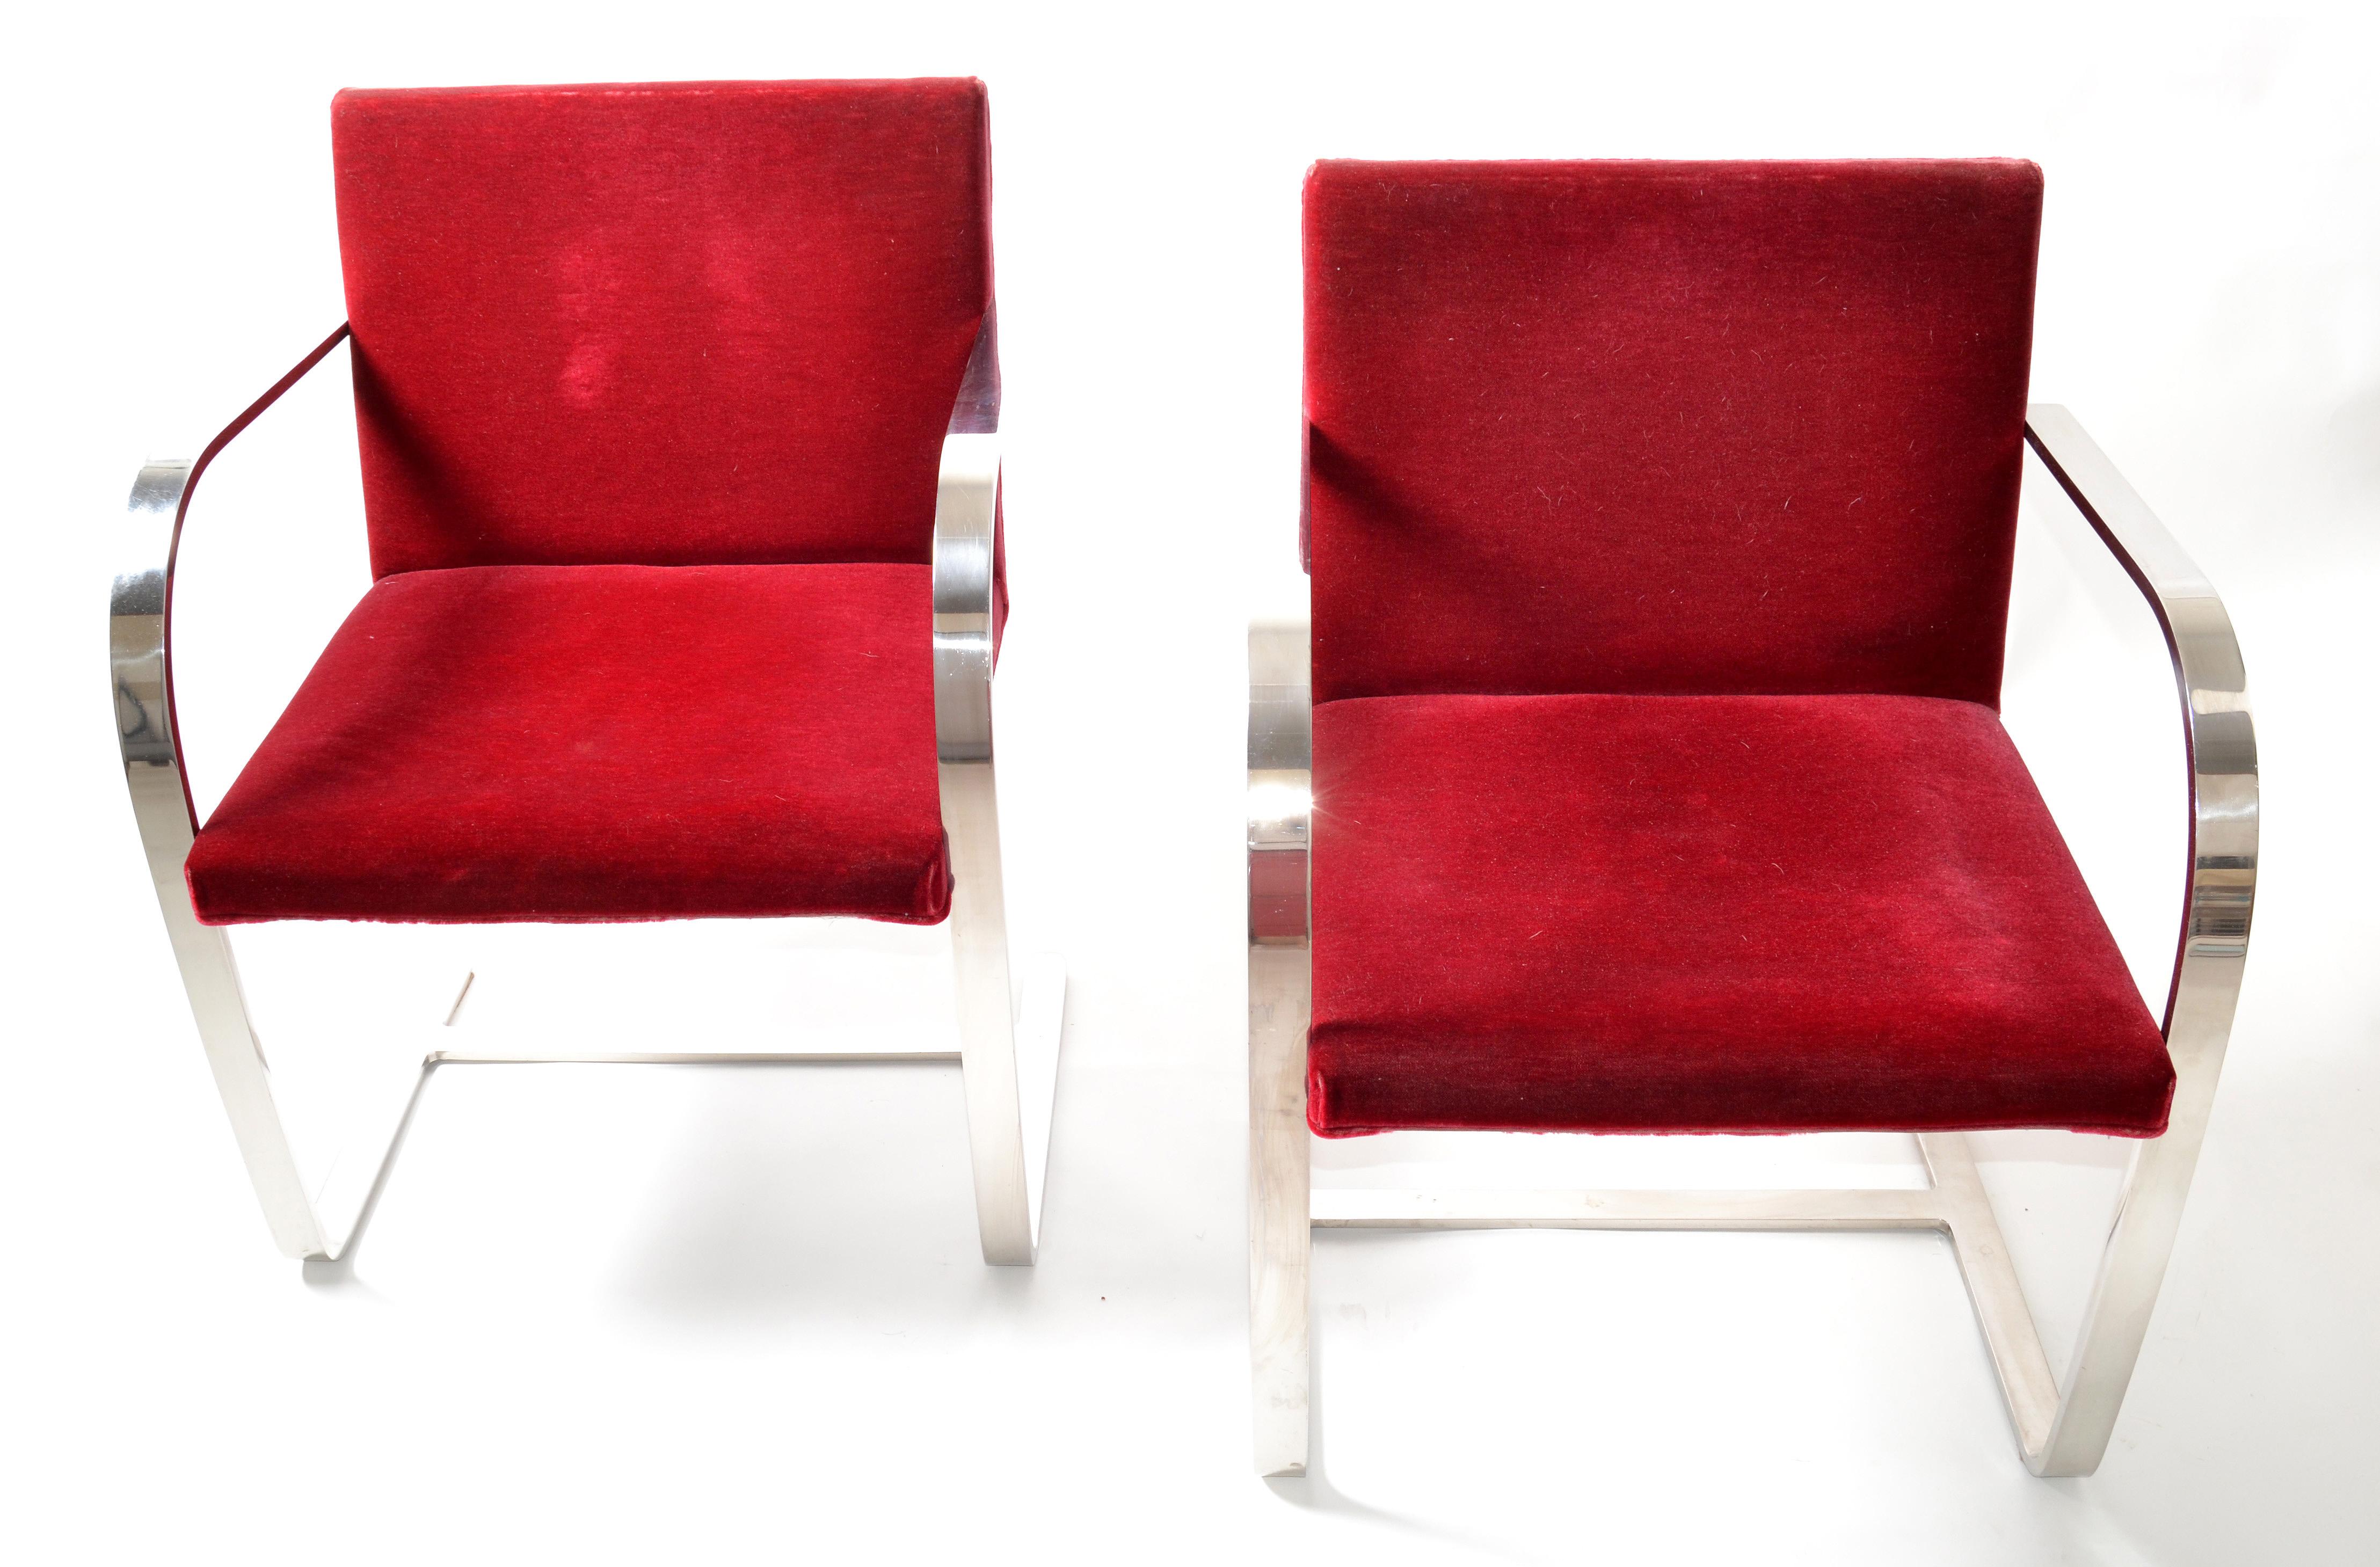 Mies Van Der Rohe for Knoll Stainless Steel Brno Chairs Red Velvet 1979, Pair For Sale 7